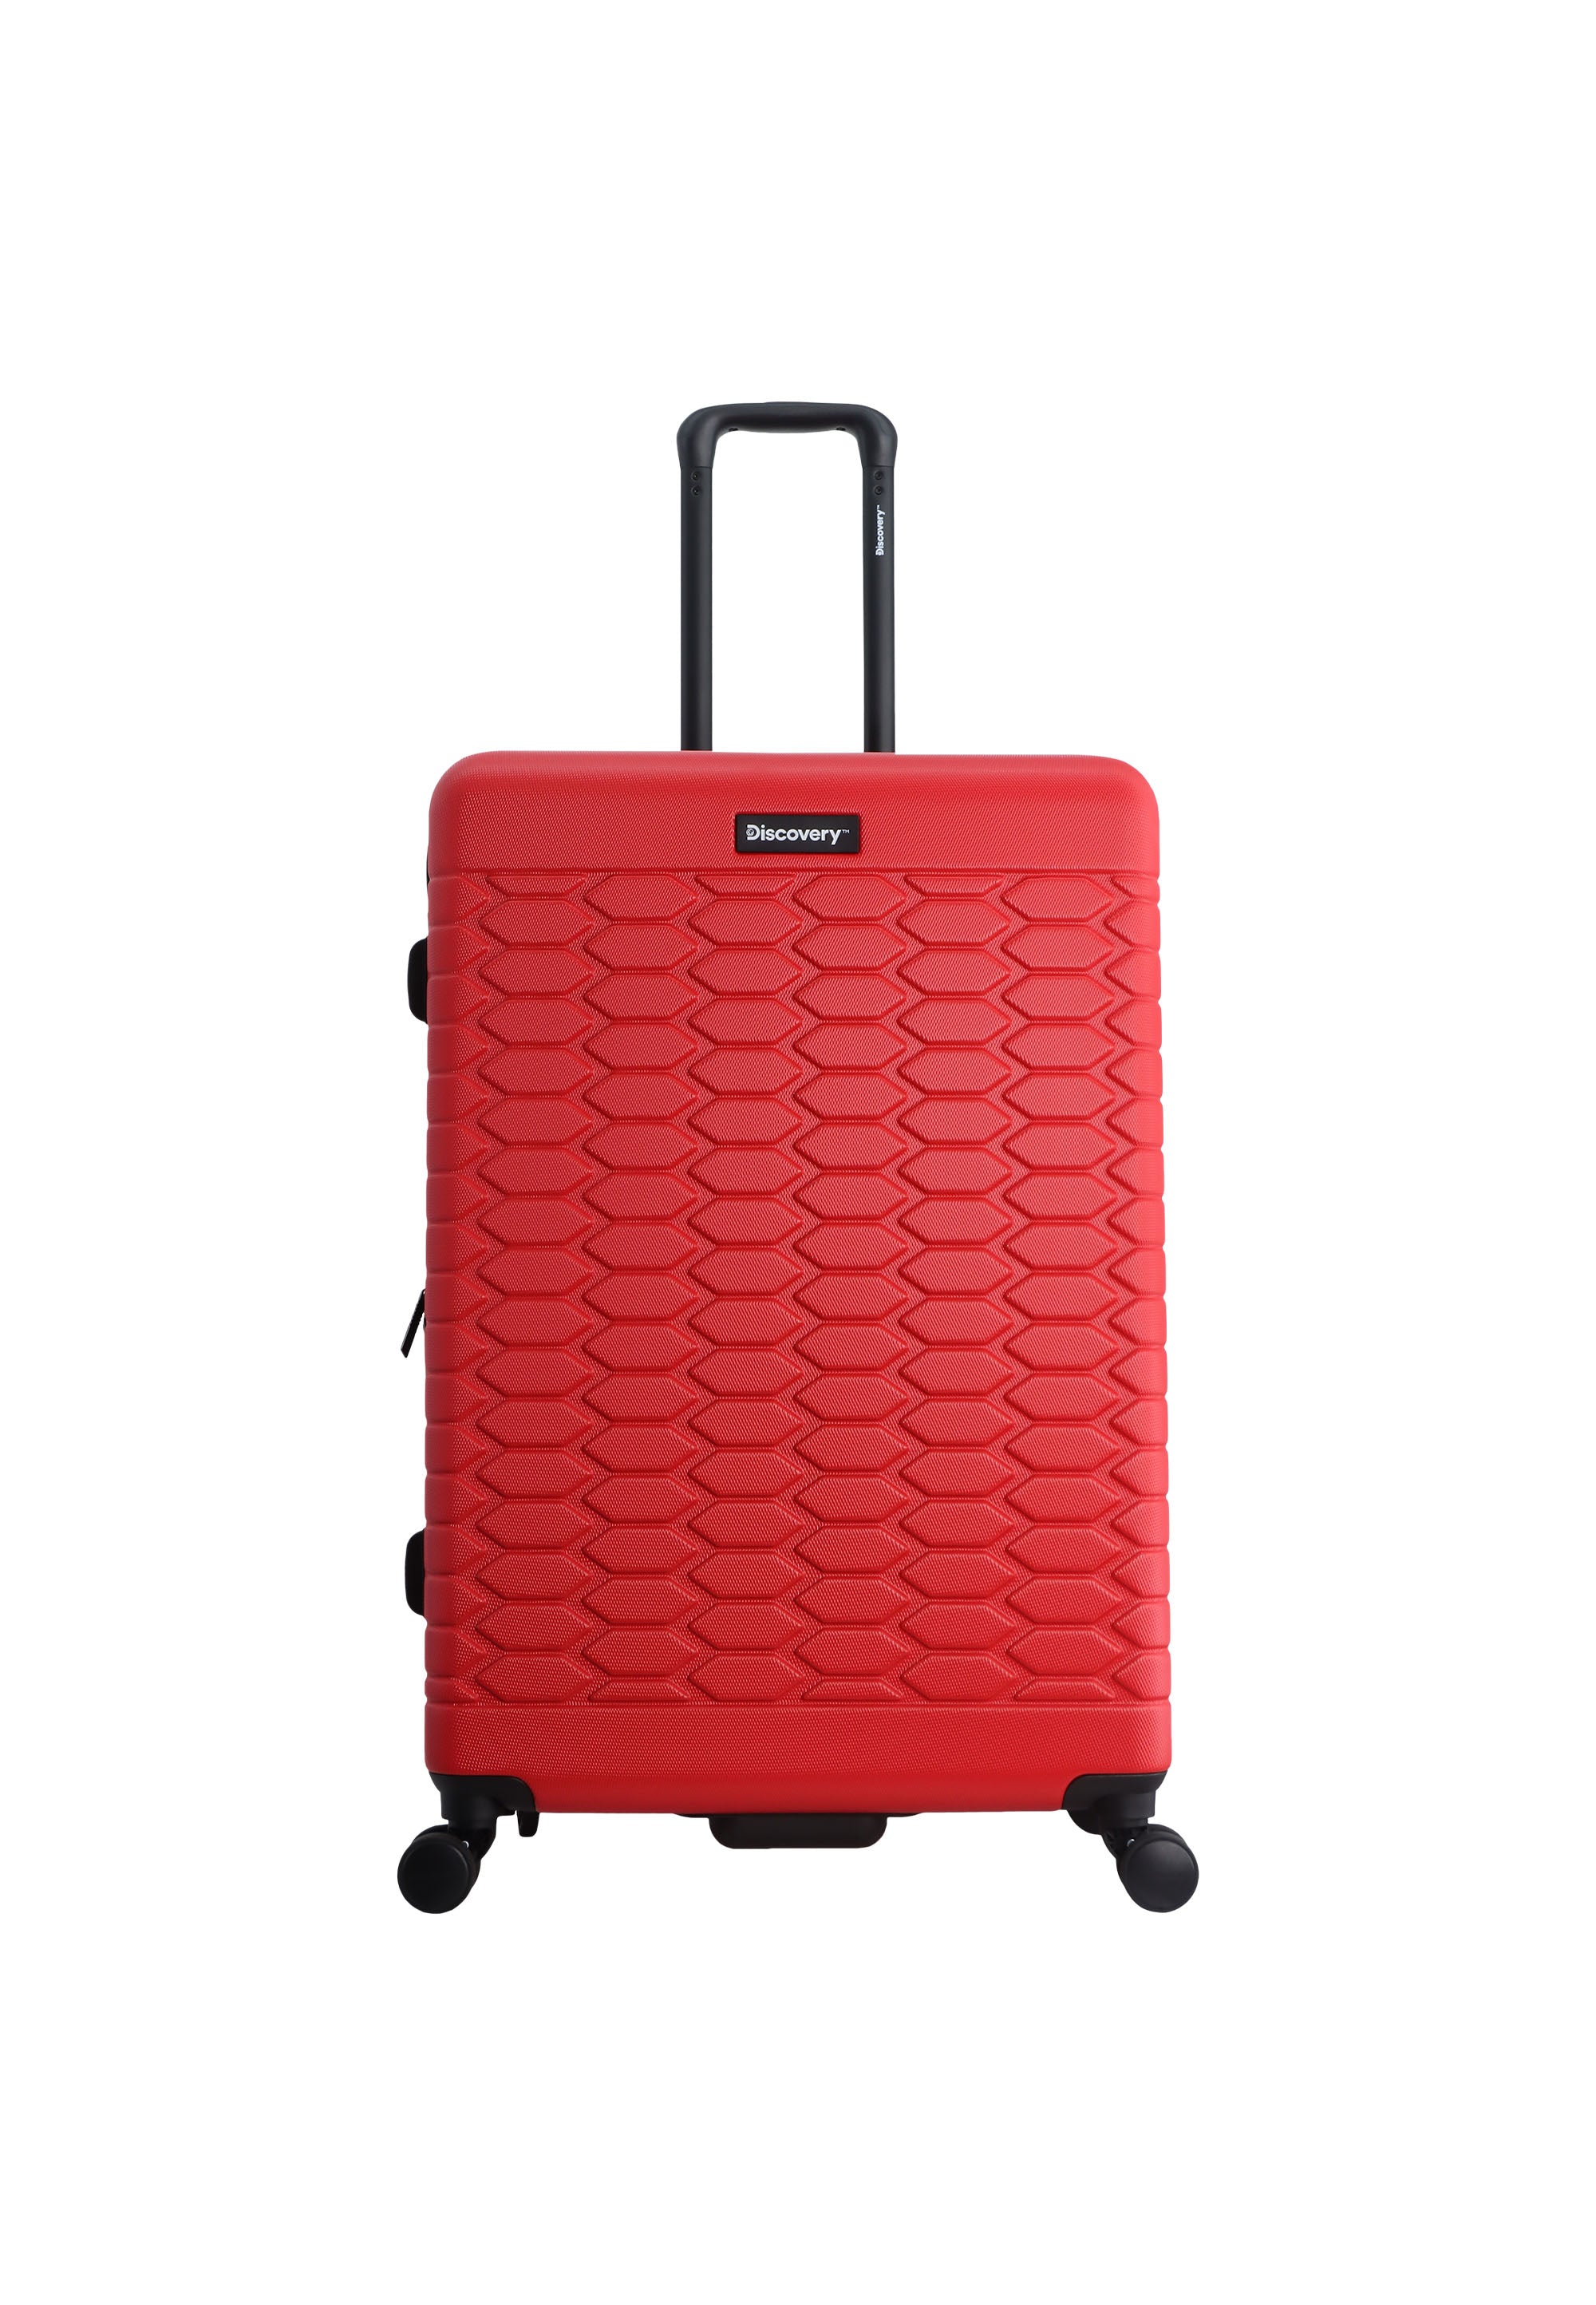 Discovery - Reptile Hartschalenkoffer / Trolley / Reisekoffer - 77 cm - (Large) - Rot